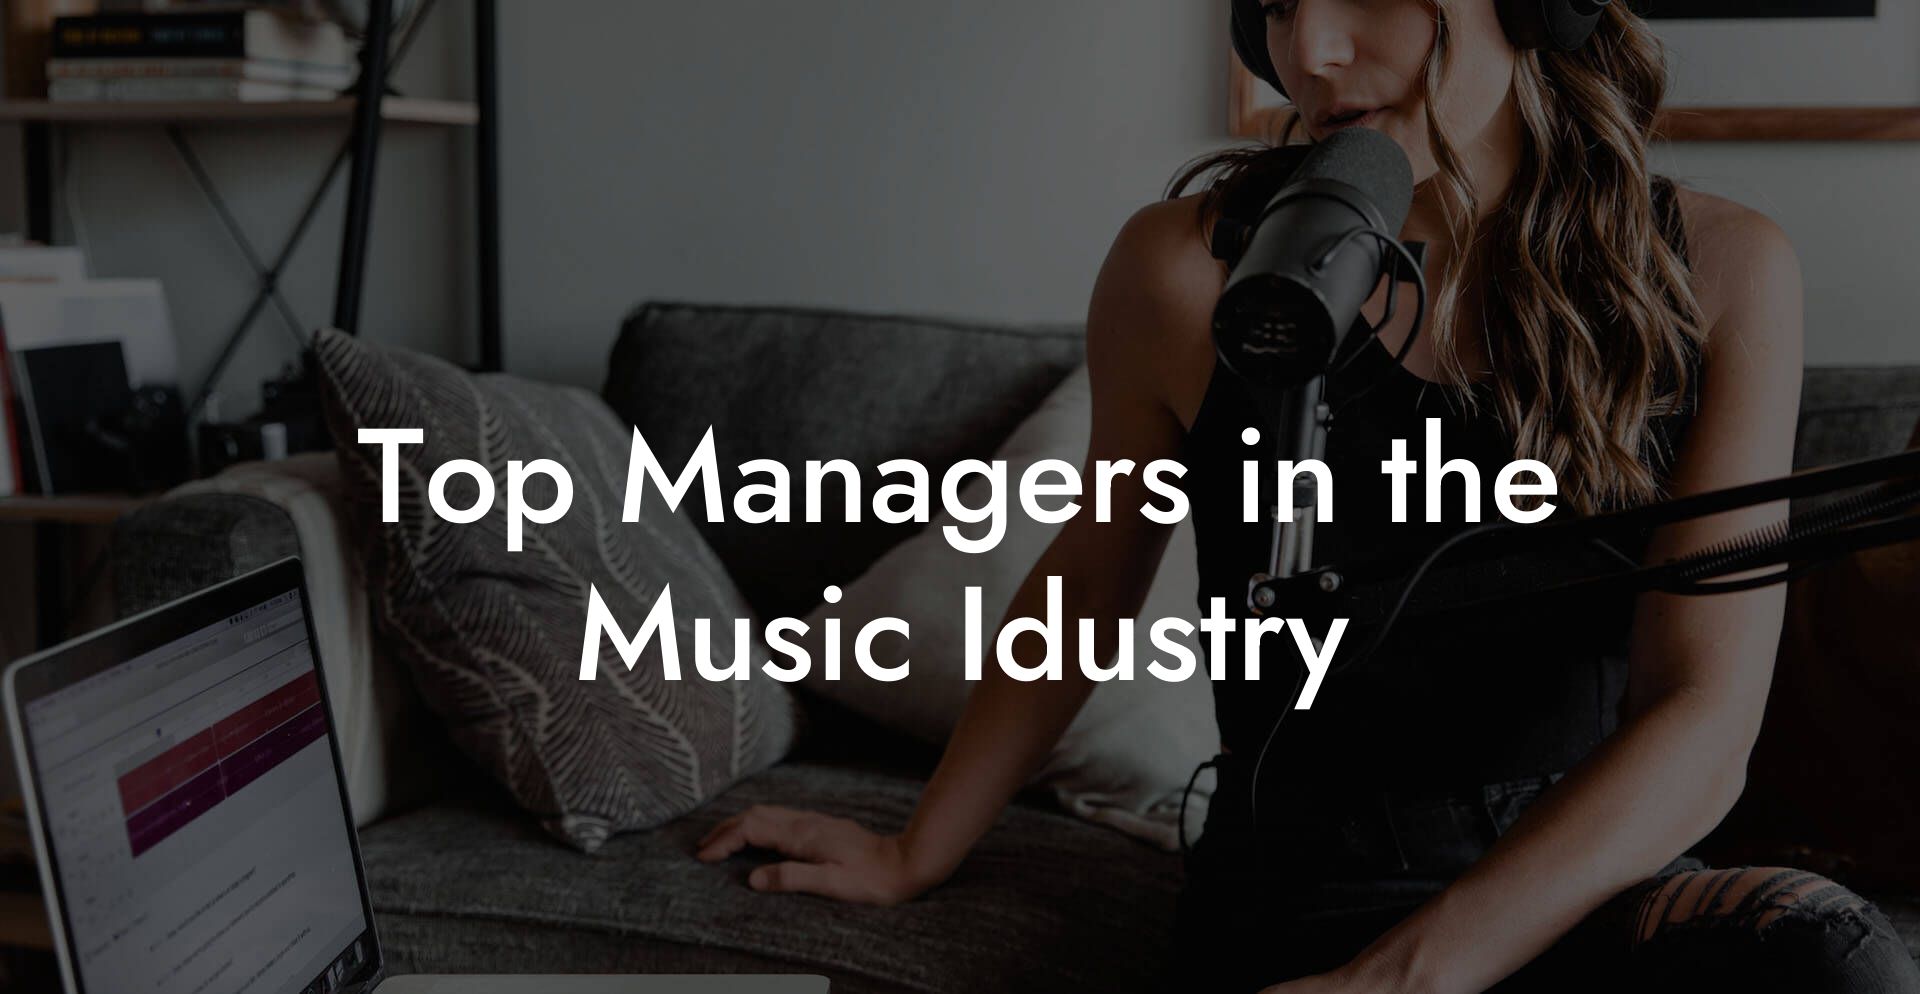 Top Managers in the Music Idustry